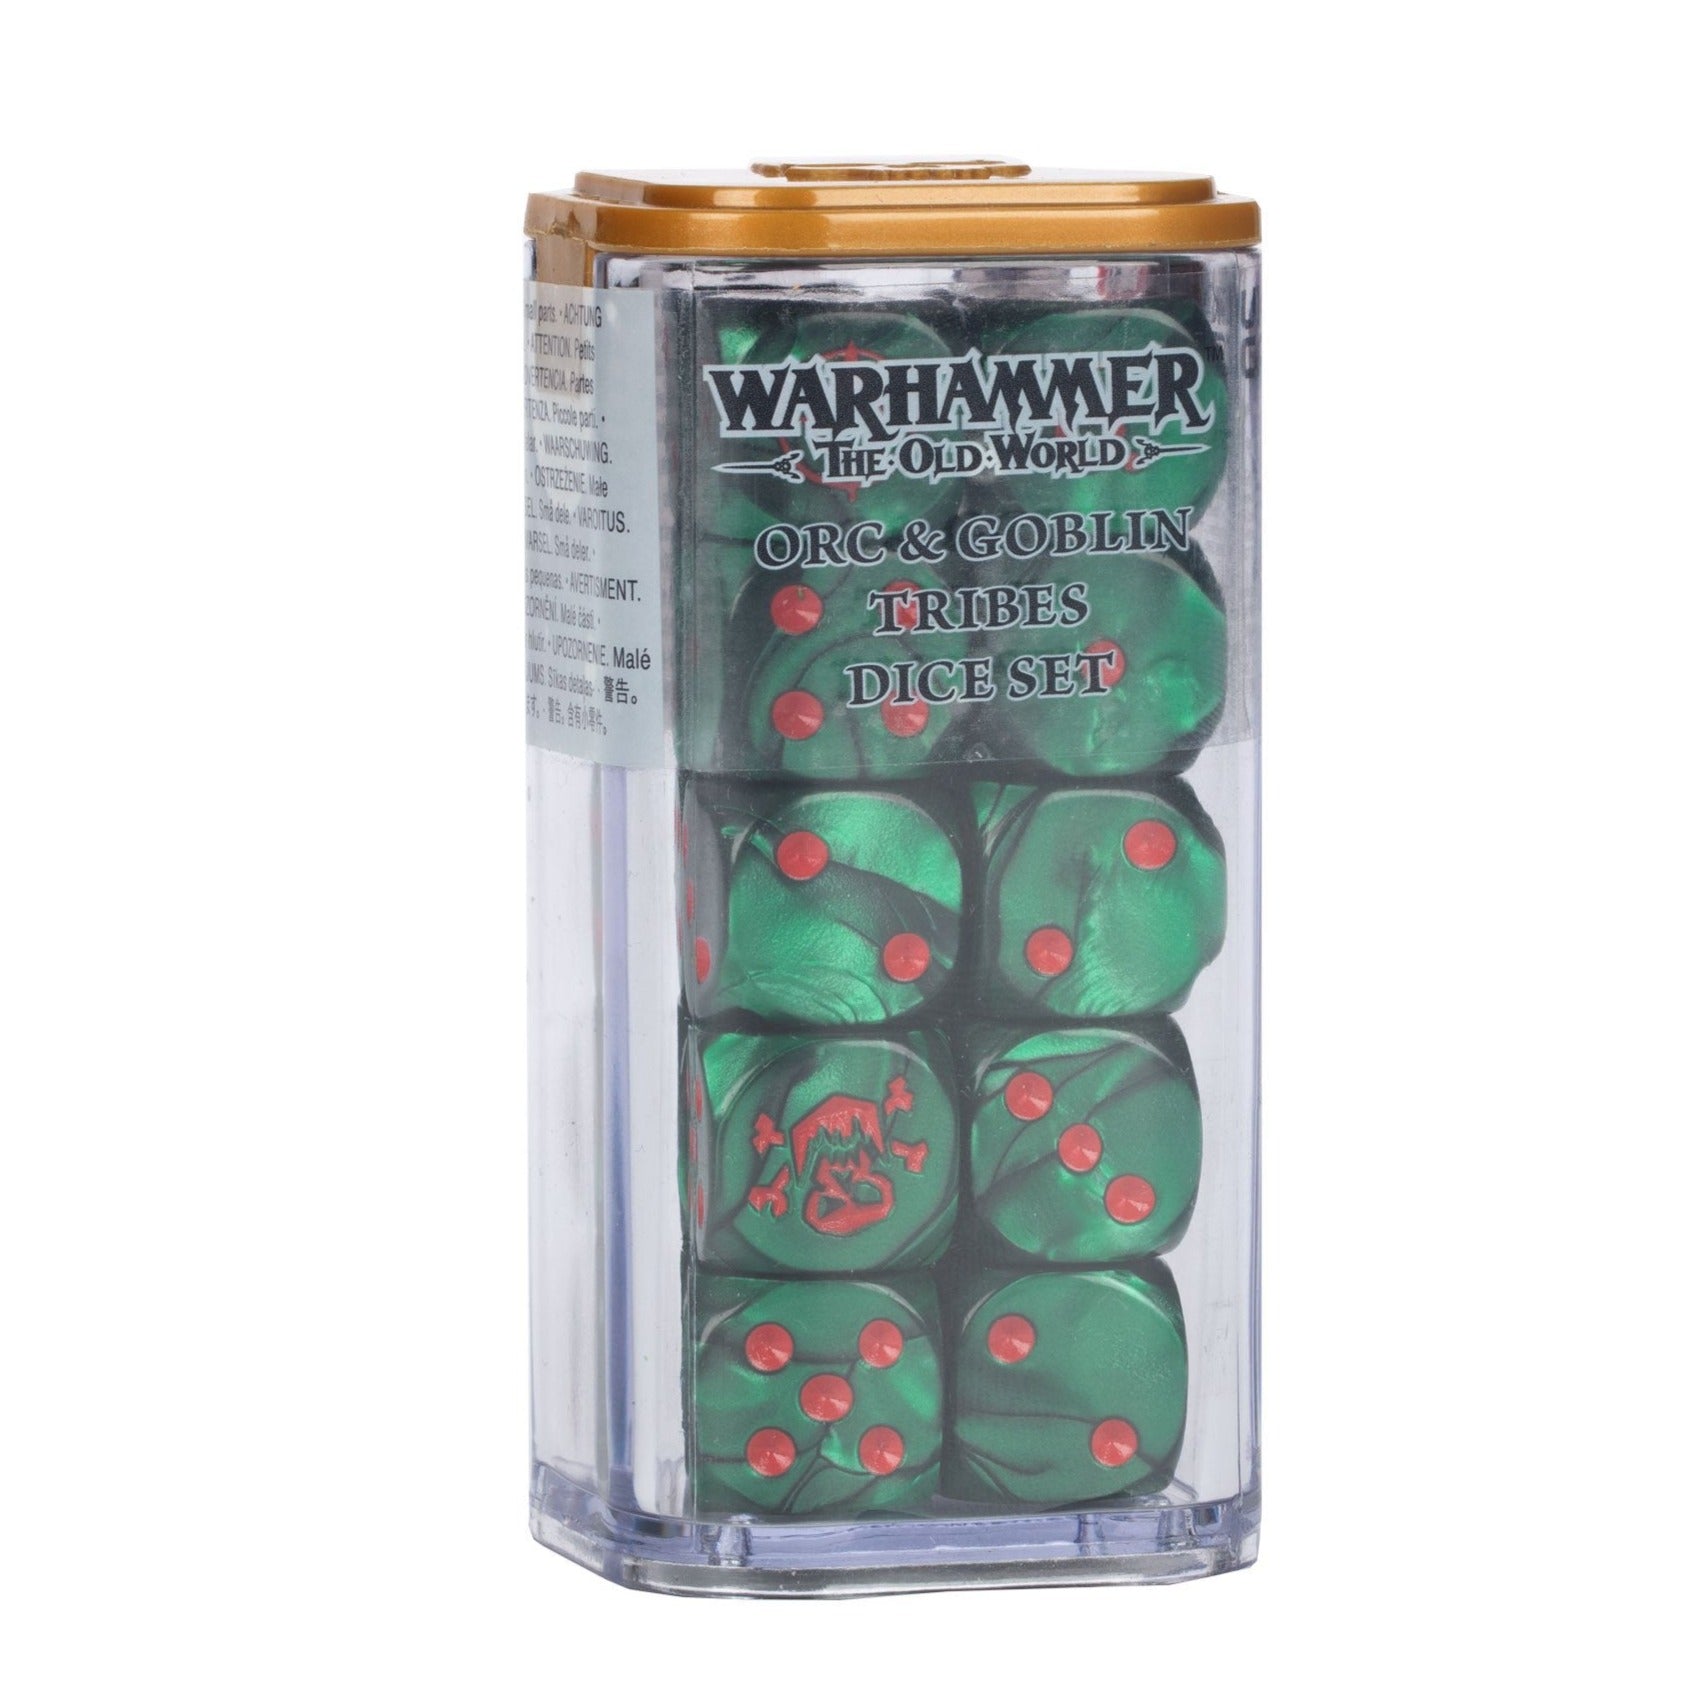 The Old World: Orc & Goblin Tribes Dice - Release Date 6/4/24 - Loaded Dice